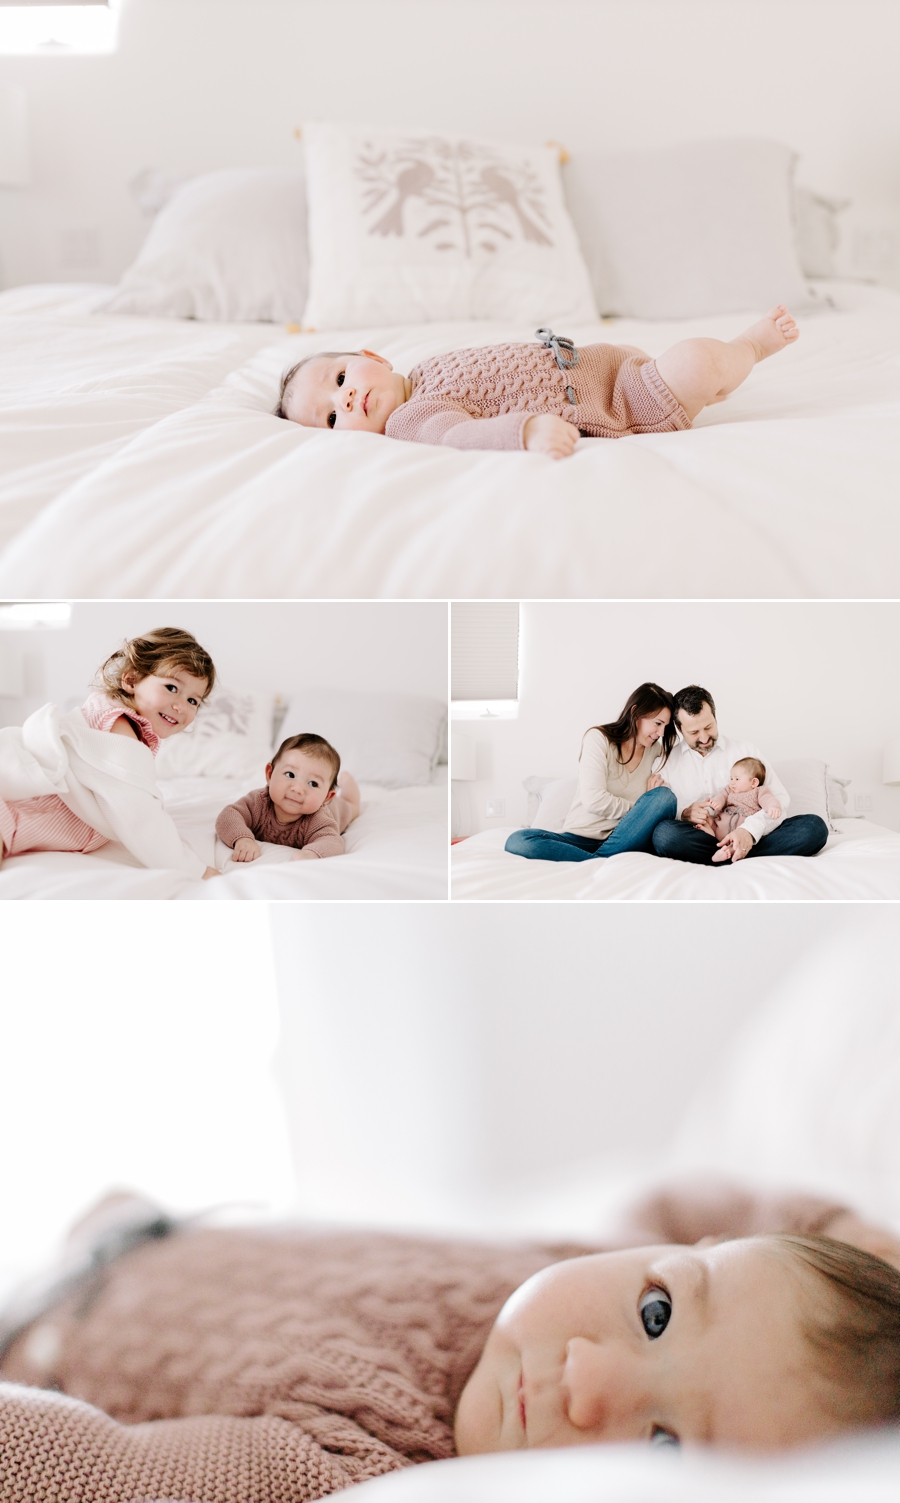 An Intimate in home family photo session | loversoflove.com